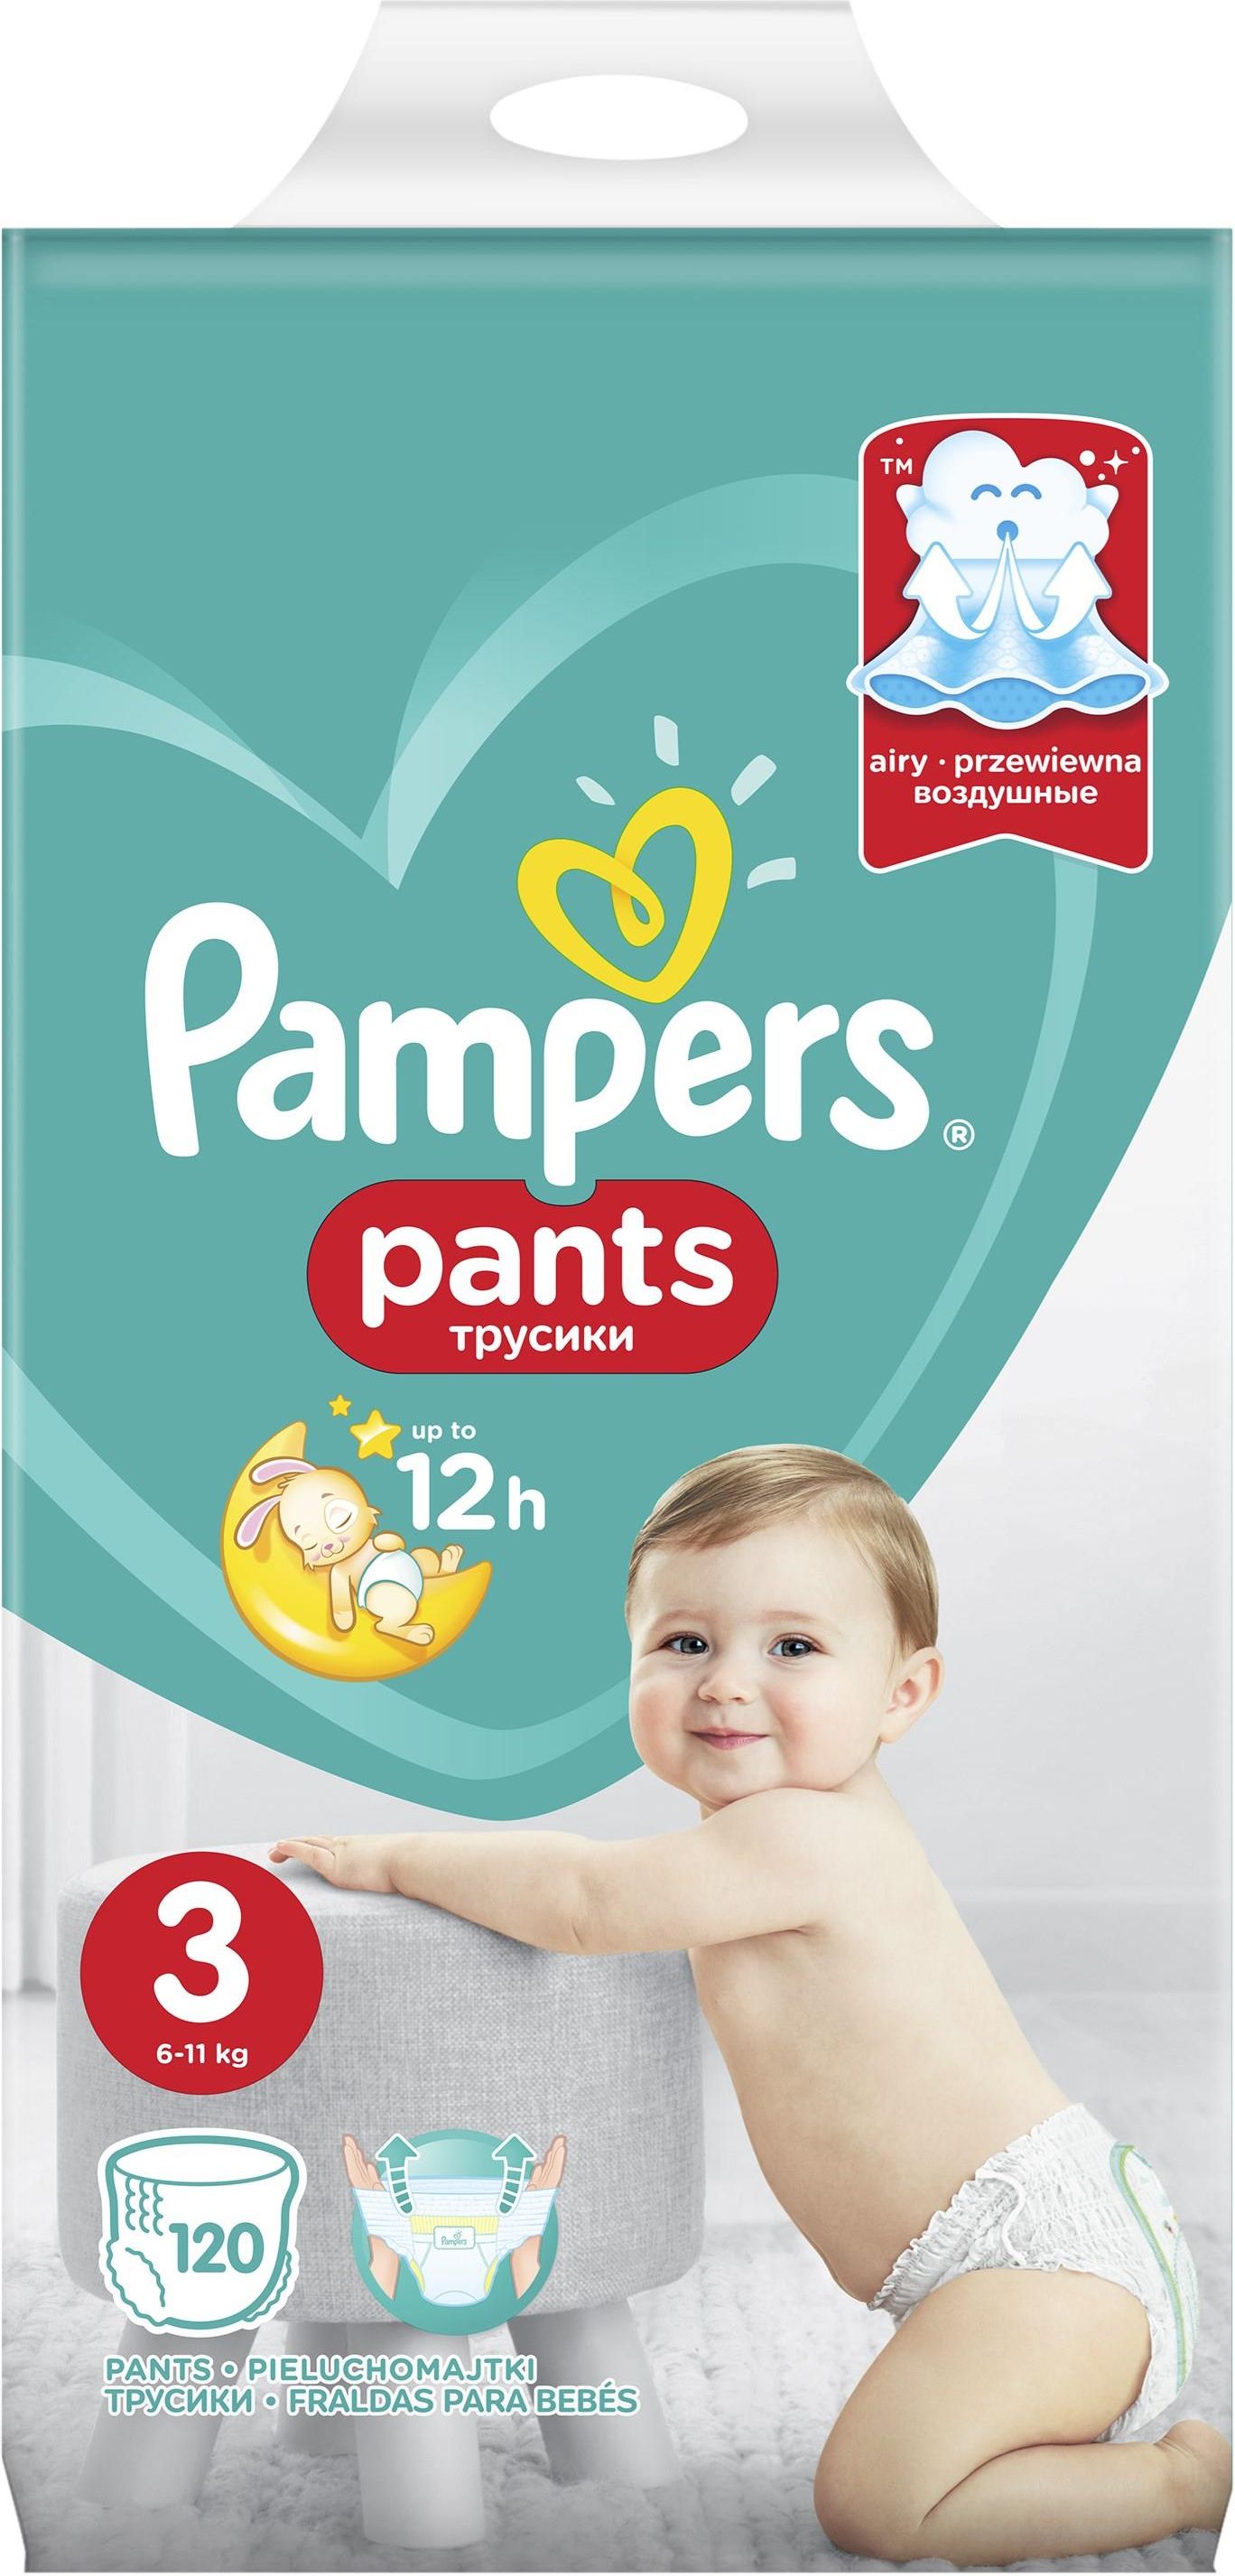 pampers pants 4 promocja carrefour